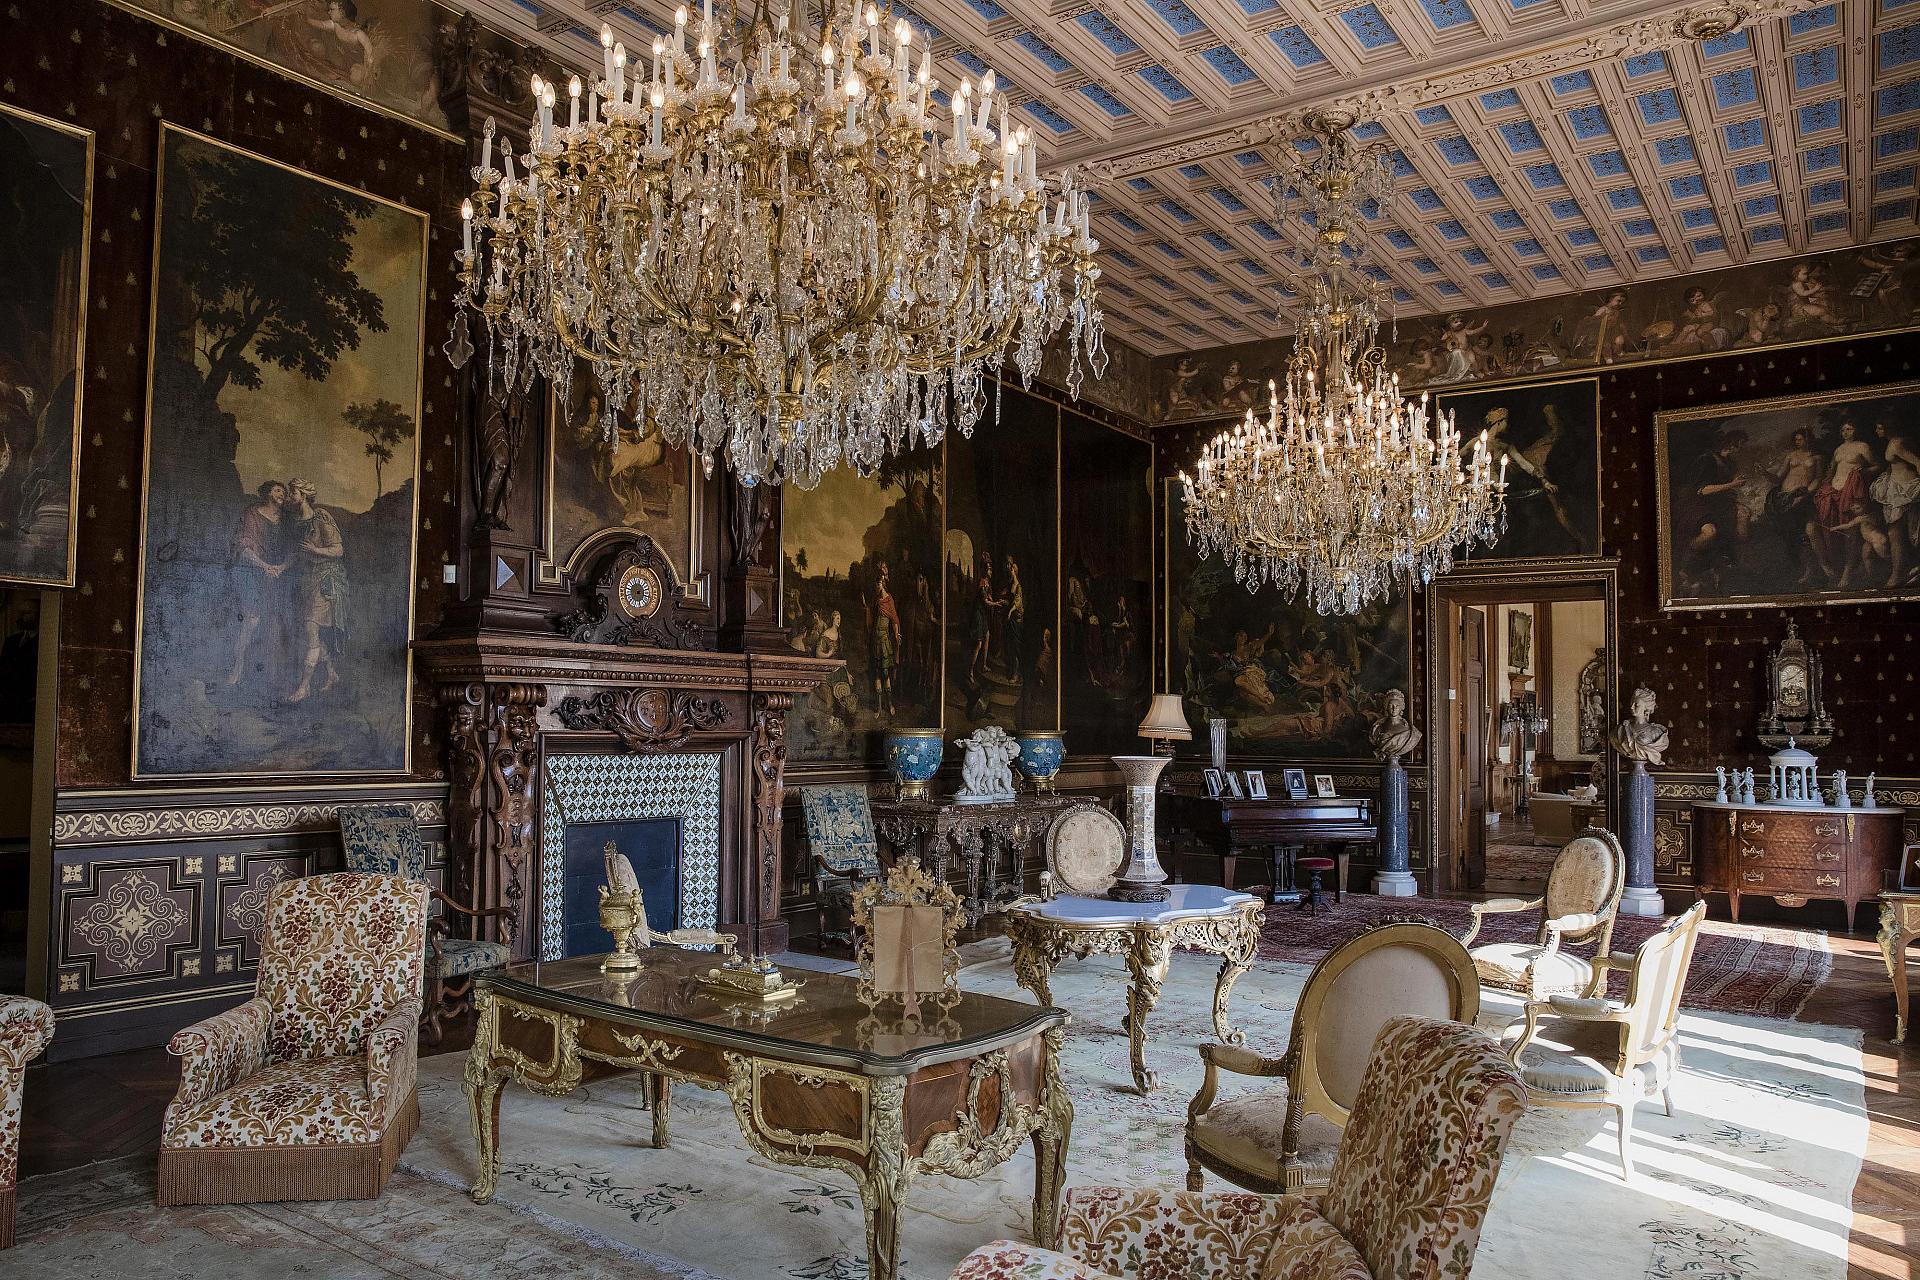 Exclusive : The Most Expensive House On Earth